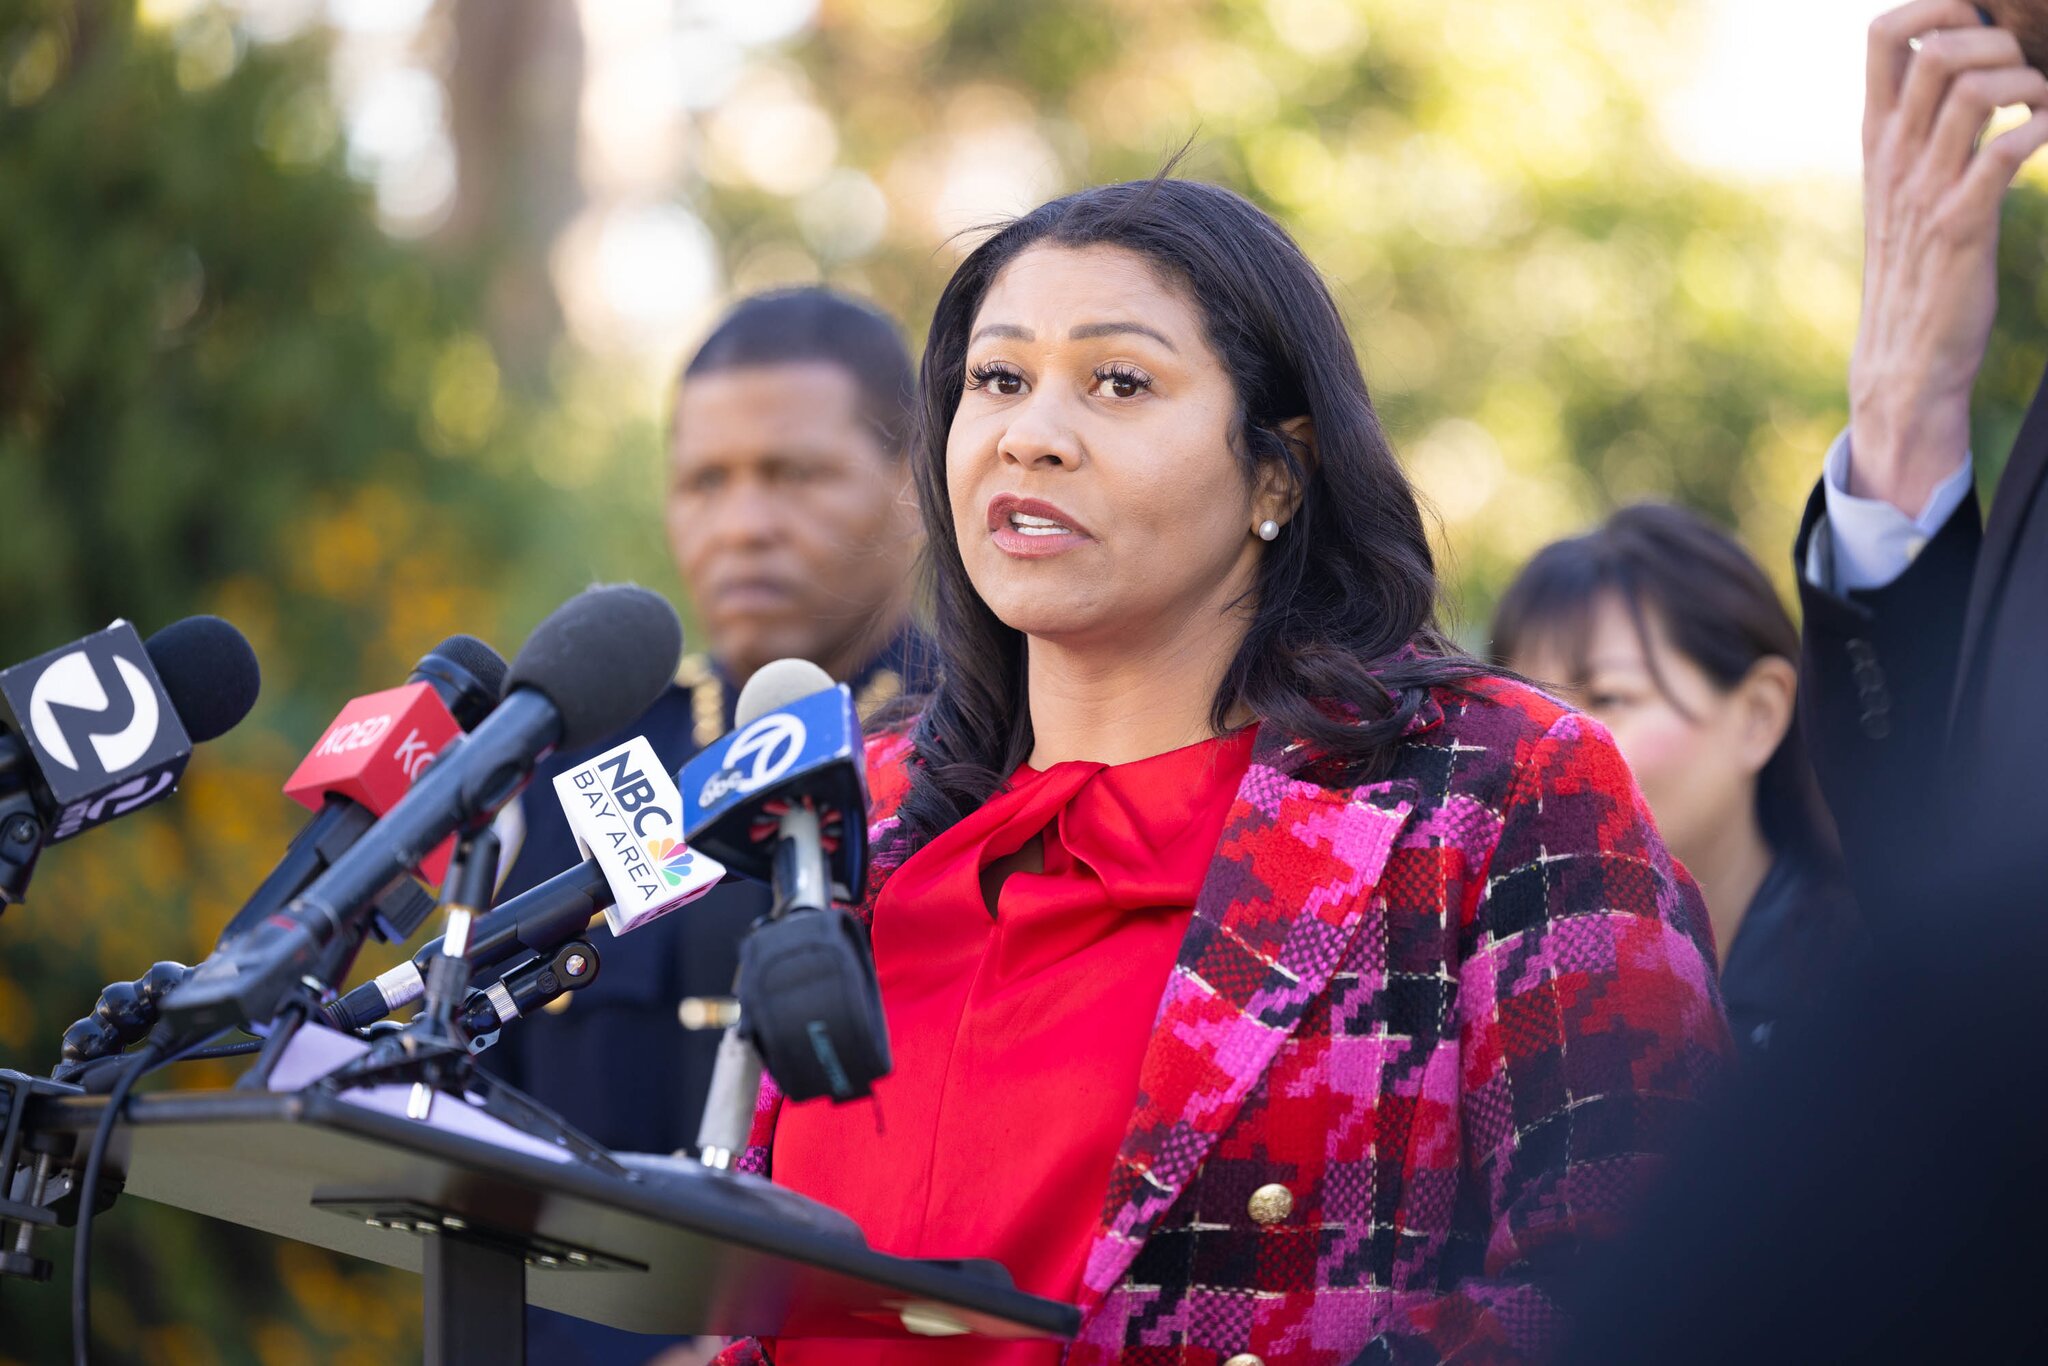 A woman in a red shirt and plaid blazer speaks into a microphone.